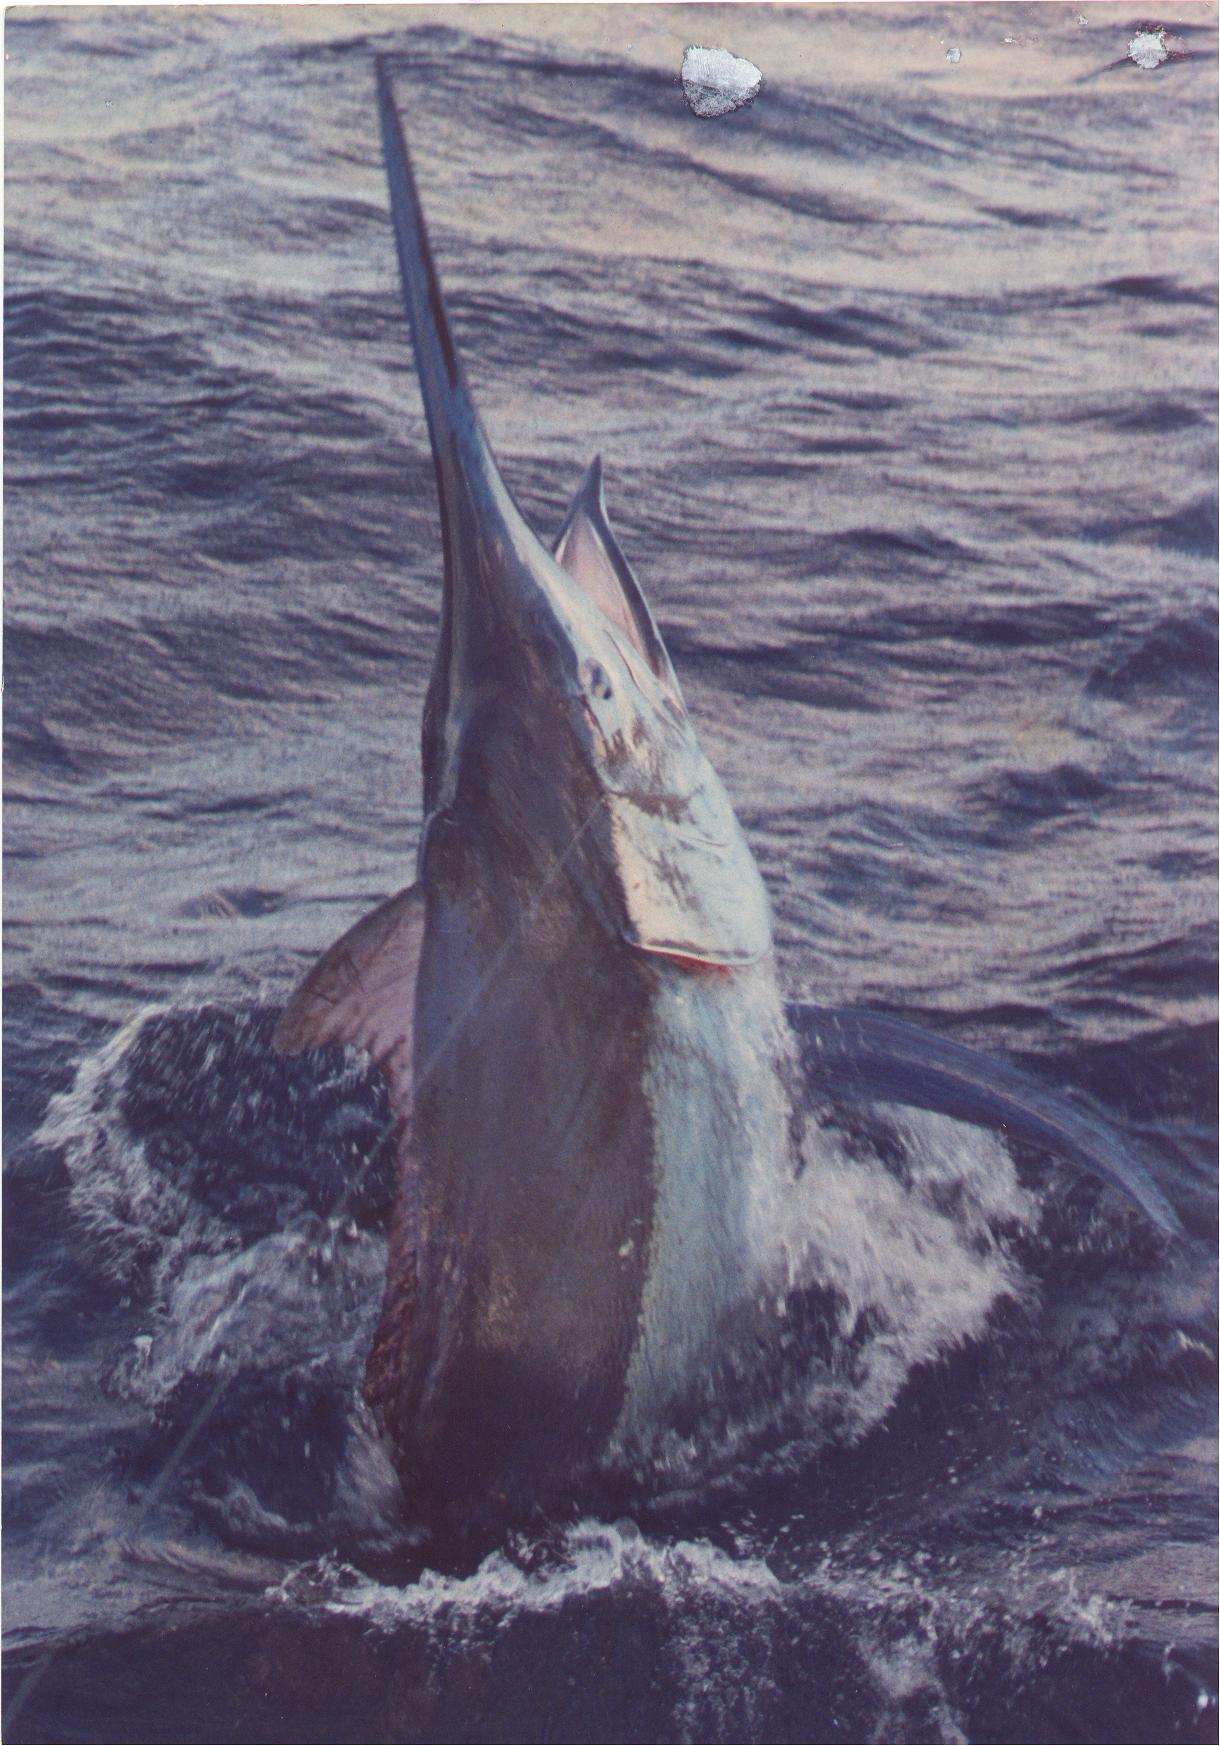 A Marlin about too jump